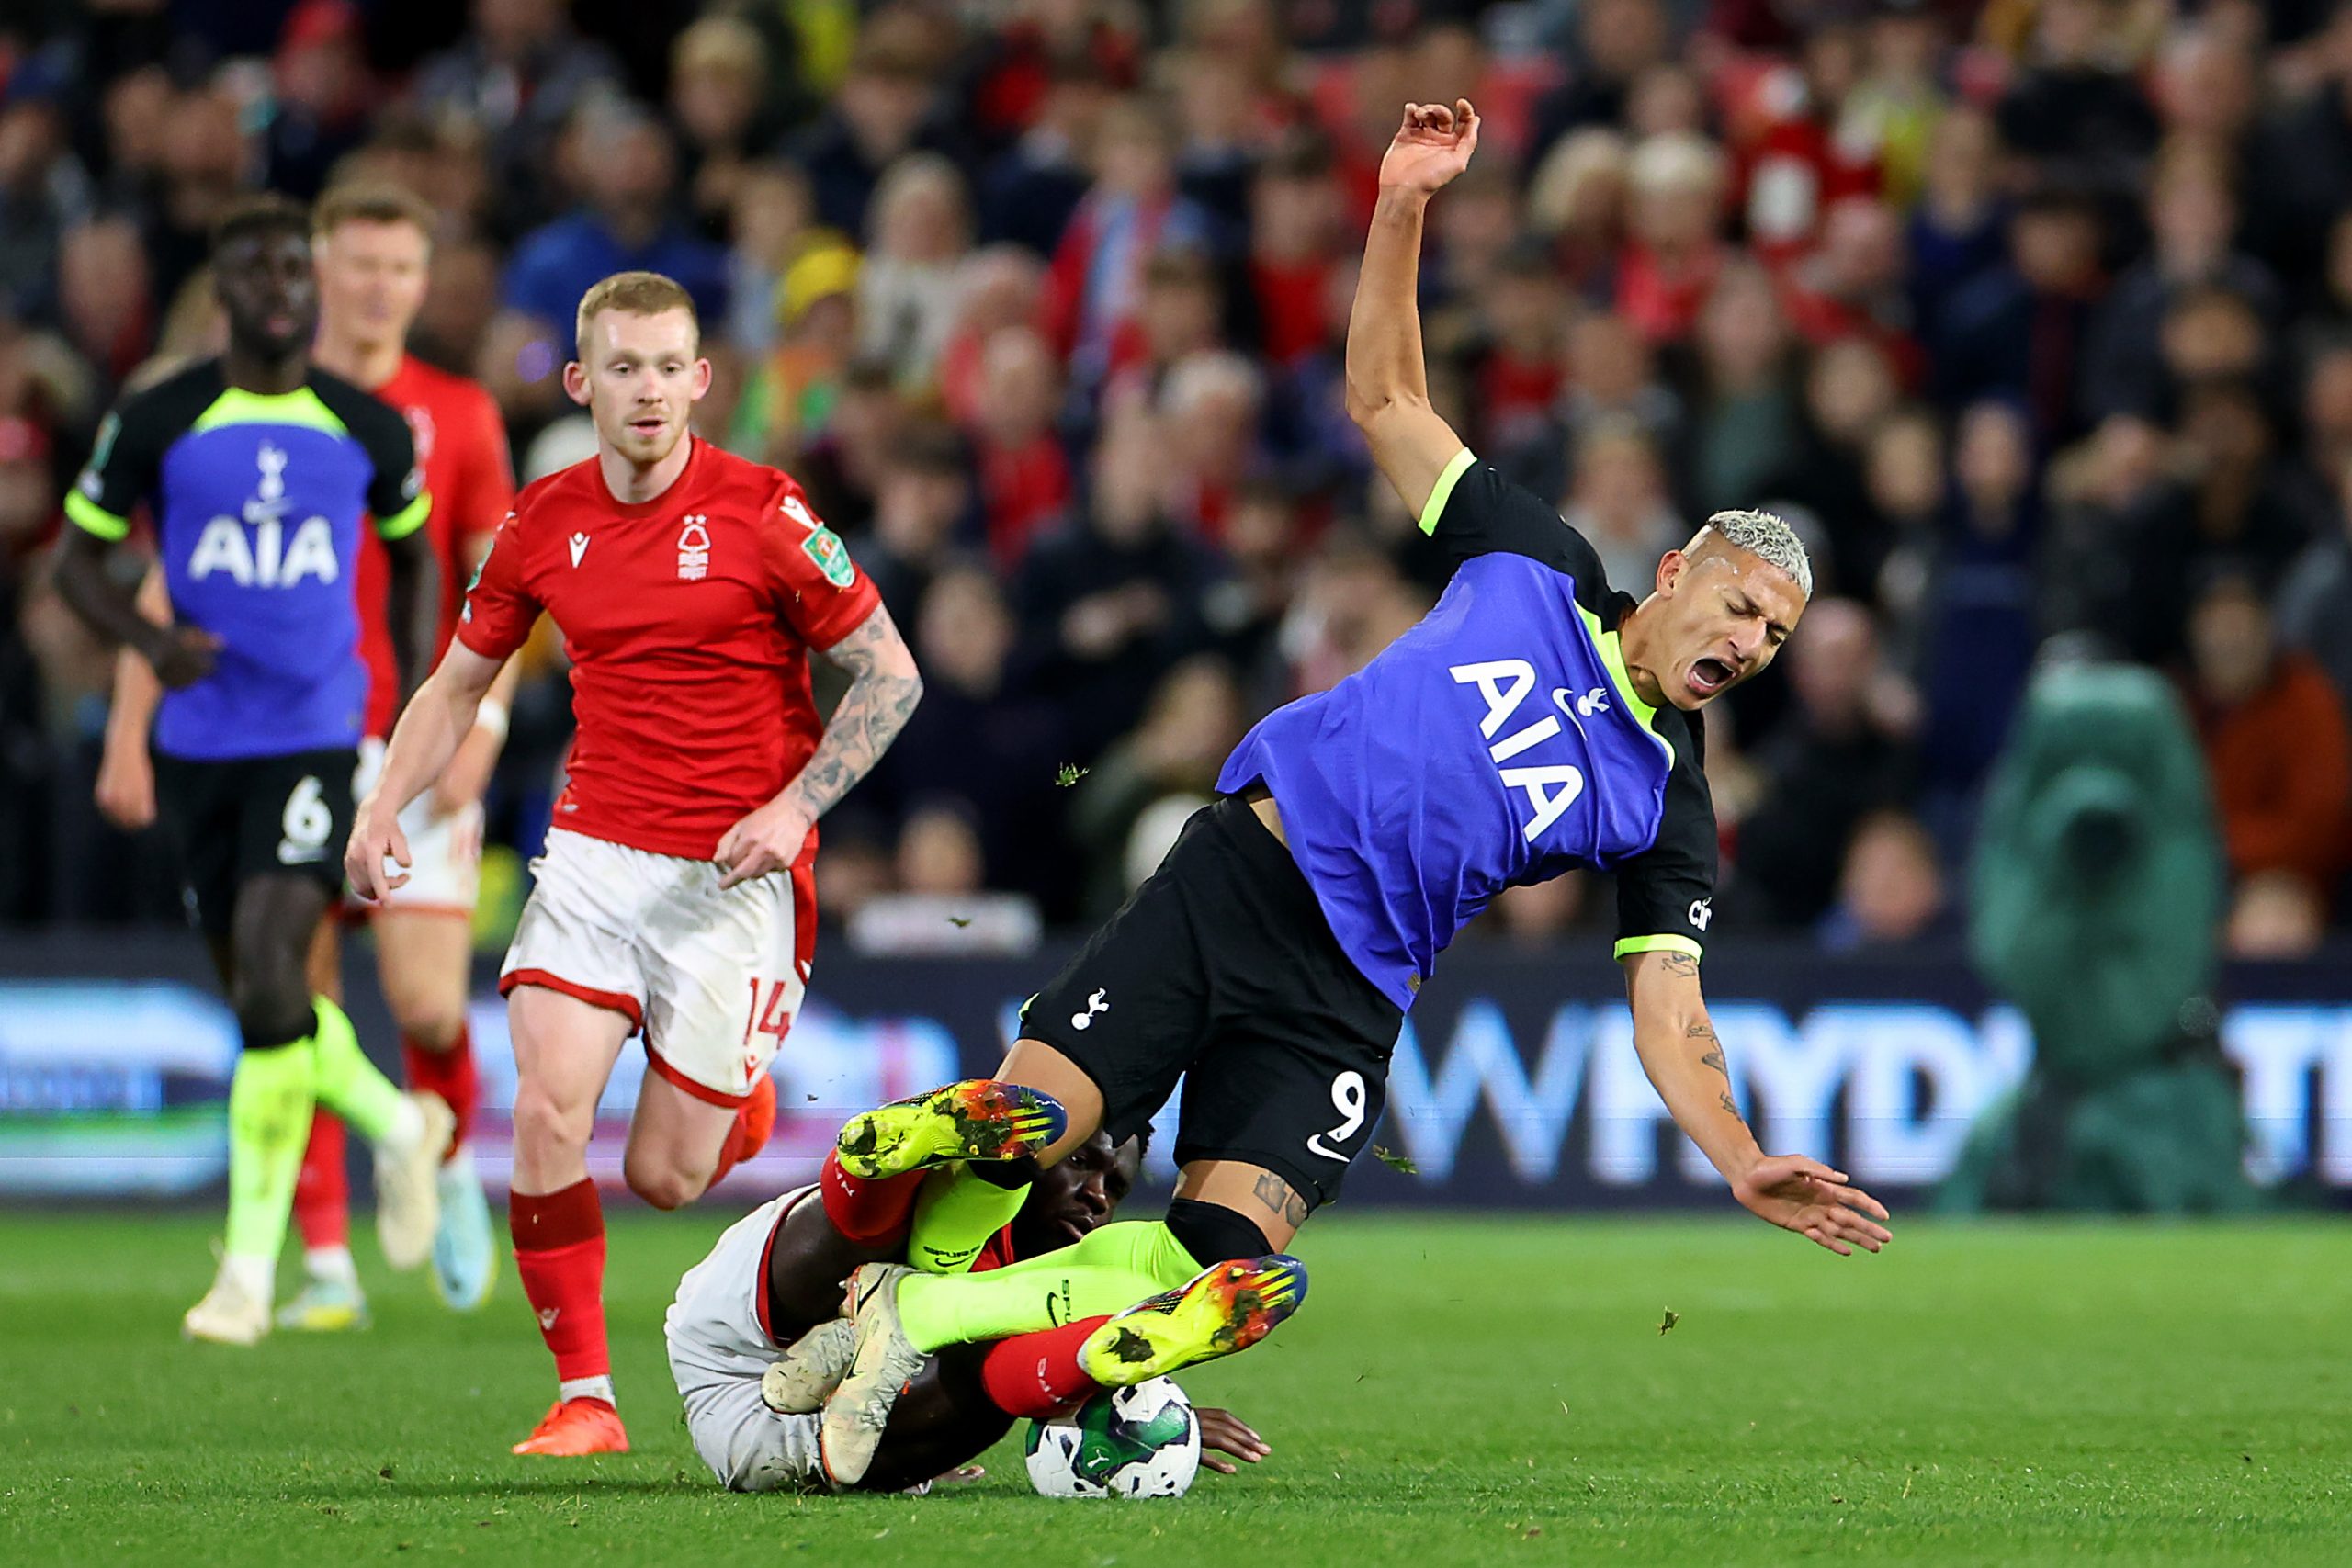 NOTTINGHAM, ENGLAND - NOVEMBER 09: Richarlison of Tottenham Hotspur is tackled by Orel Mangala of Nottingham Forest during the Carabao Cup Third Round match between Nottingham Forest and Tottenham Hotspur at City Ground on November 09, 2022 in Nottingham, England. (Photo by Catherine Ivill/Getty Images )